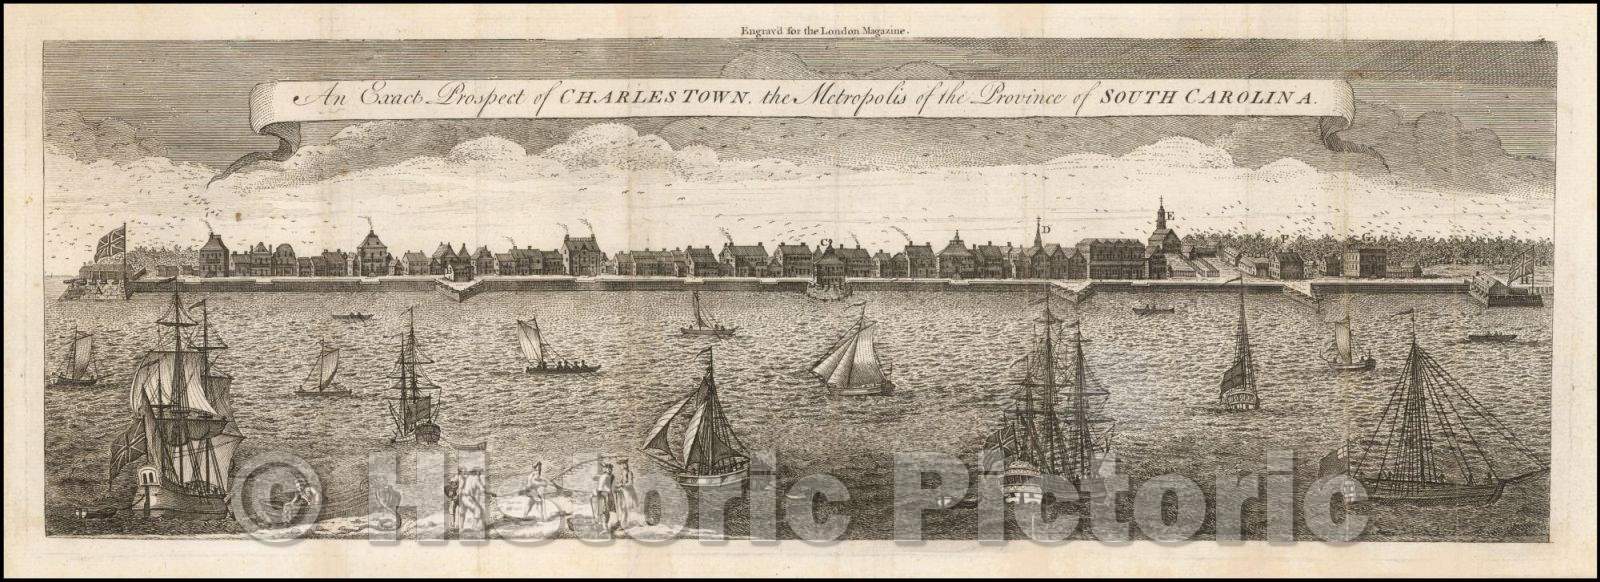 Historic Map - An Exact Prospect of Charlestown, the Metropolis of the Province of South Carolina, 1762, London Magazine - Vintage Wall Art